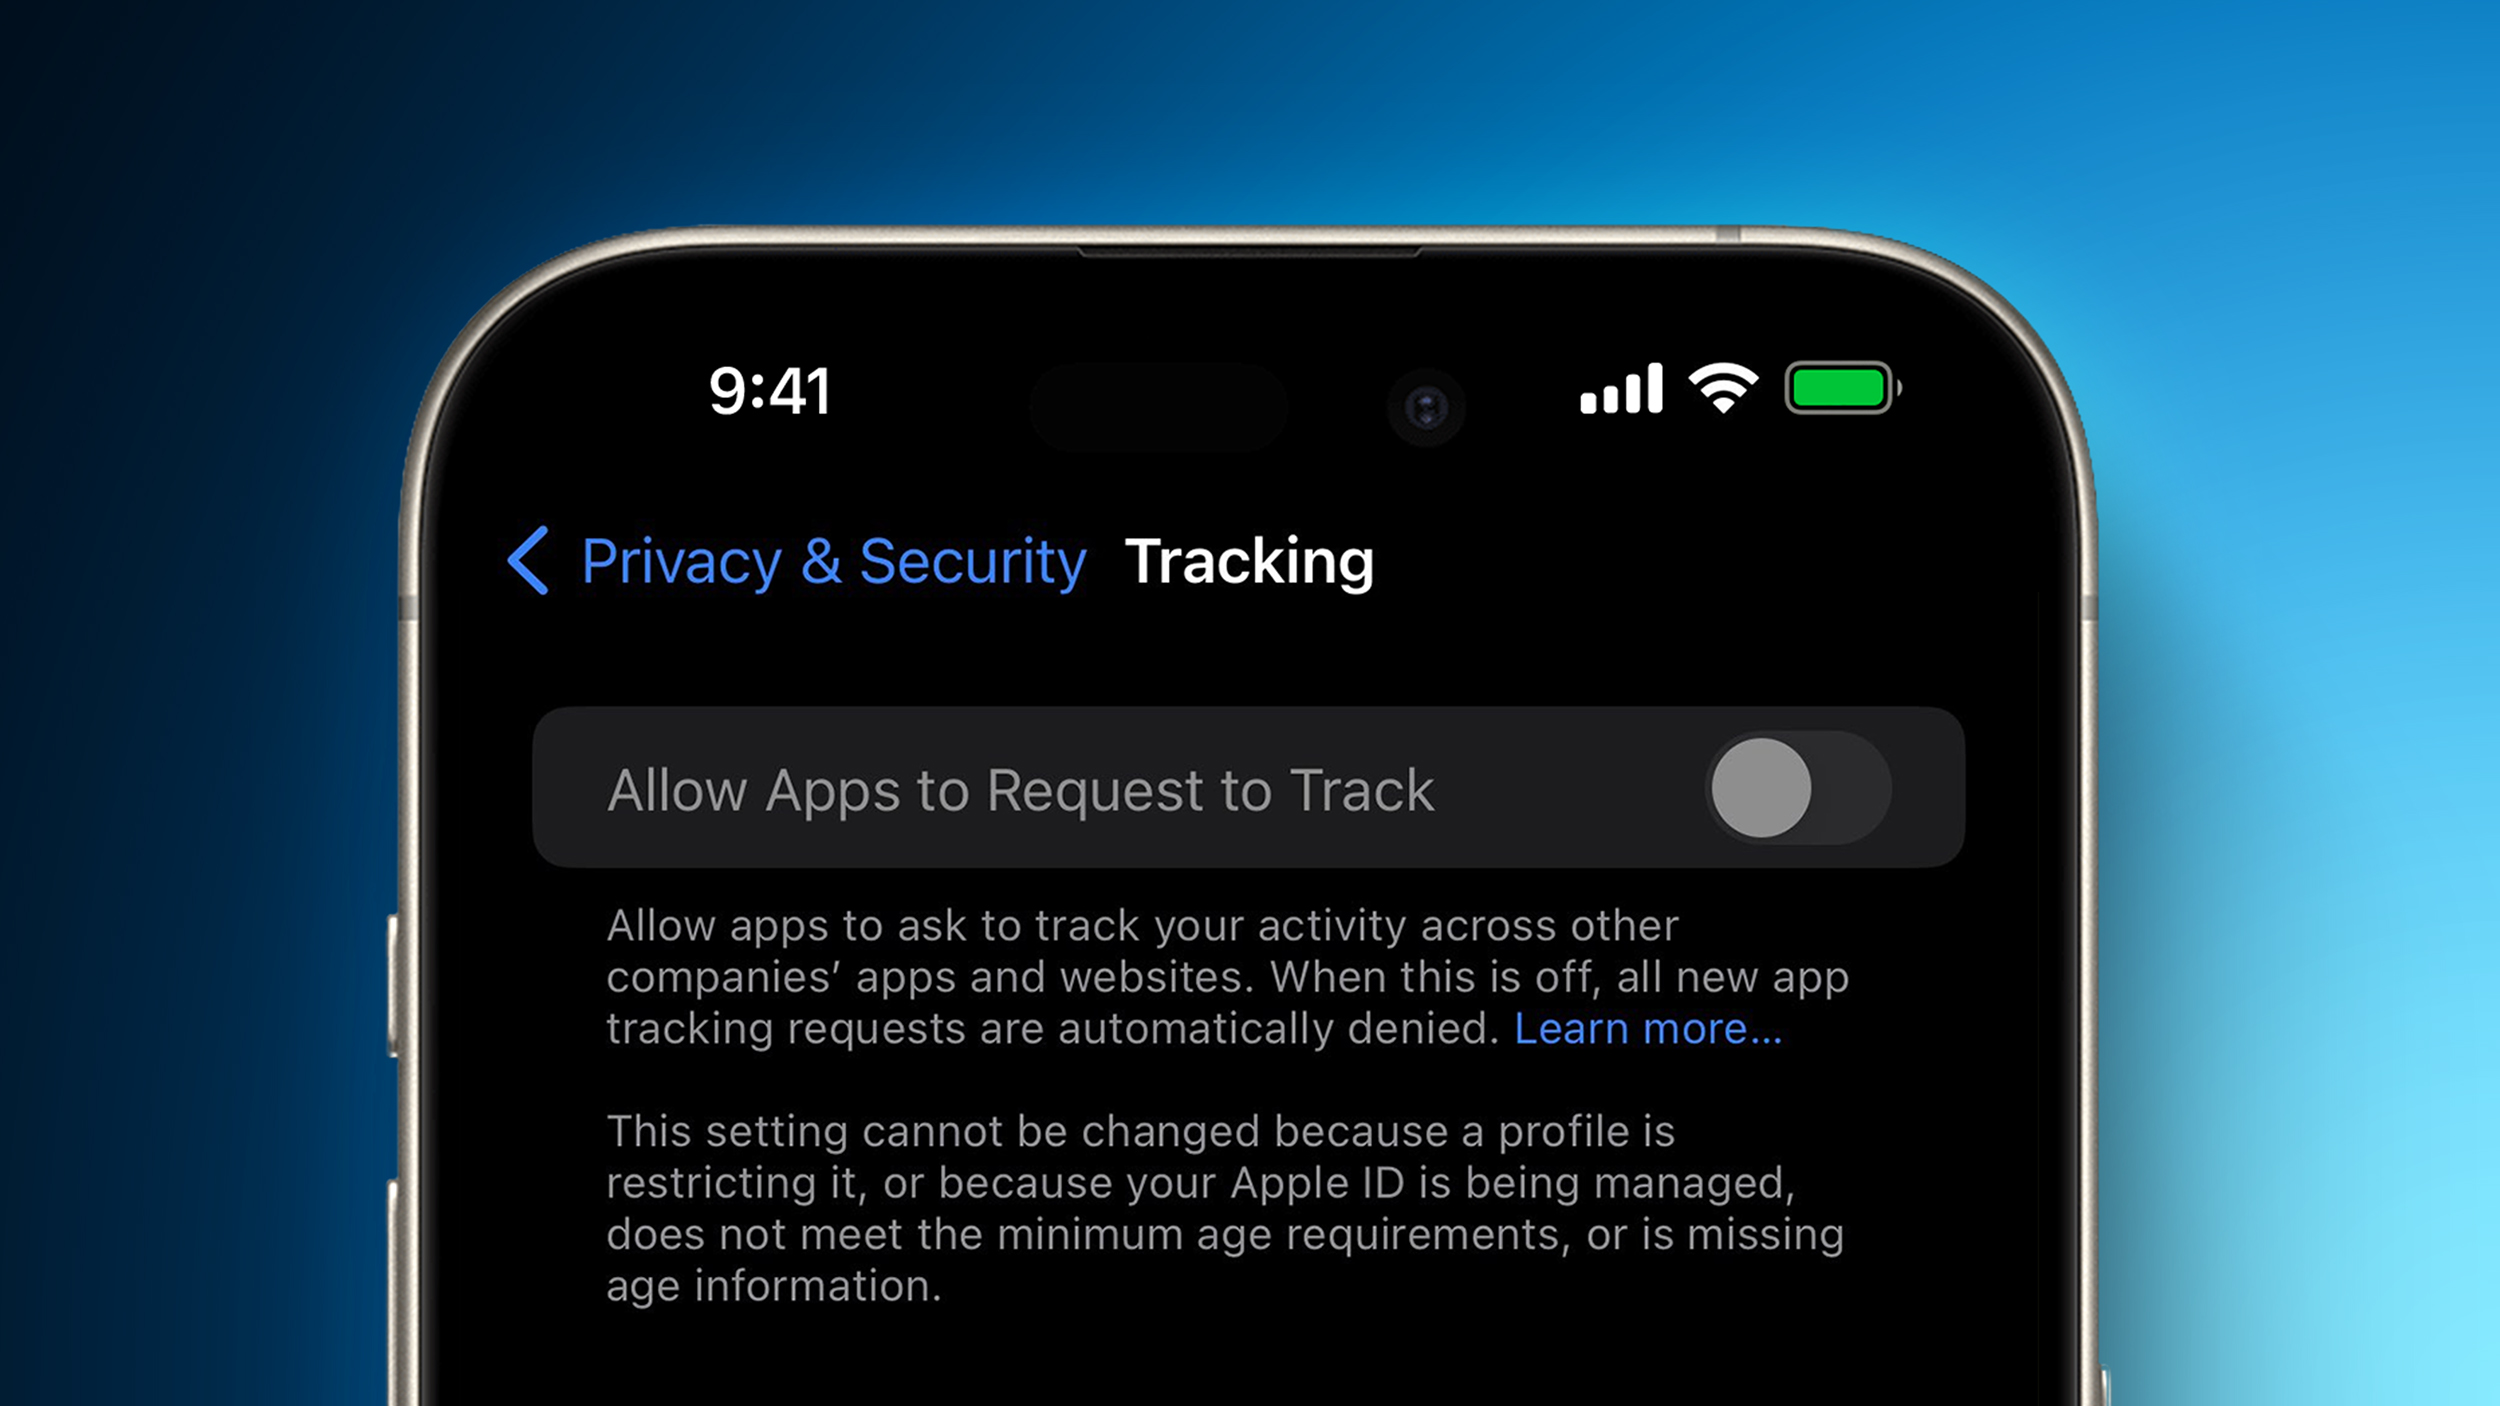 Some iPhone Users Say ‘Allow Apps to Request to Track’ Toggle is Suddenly Grayed Out